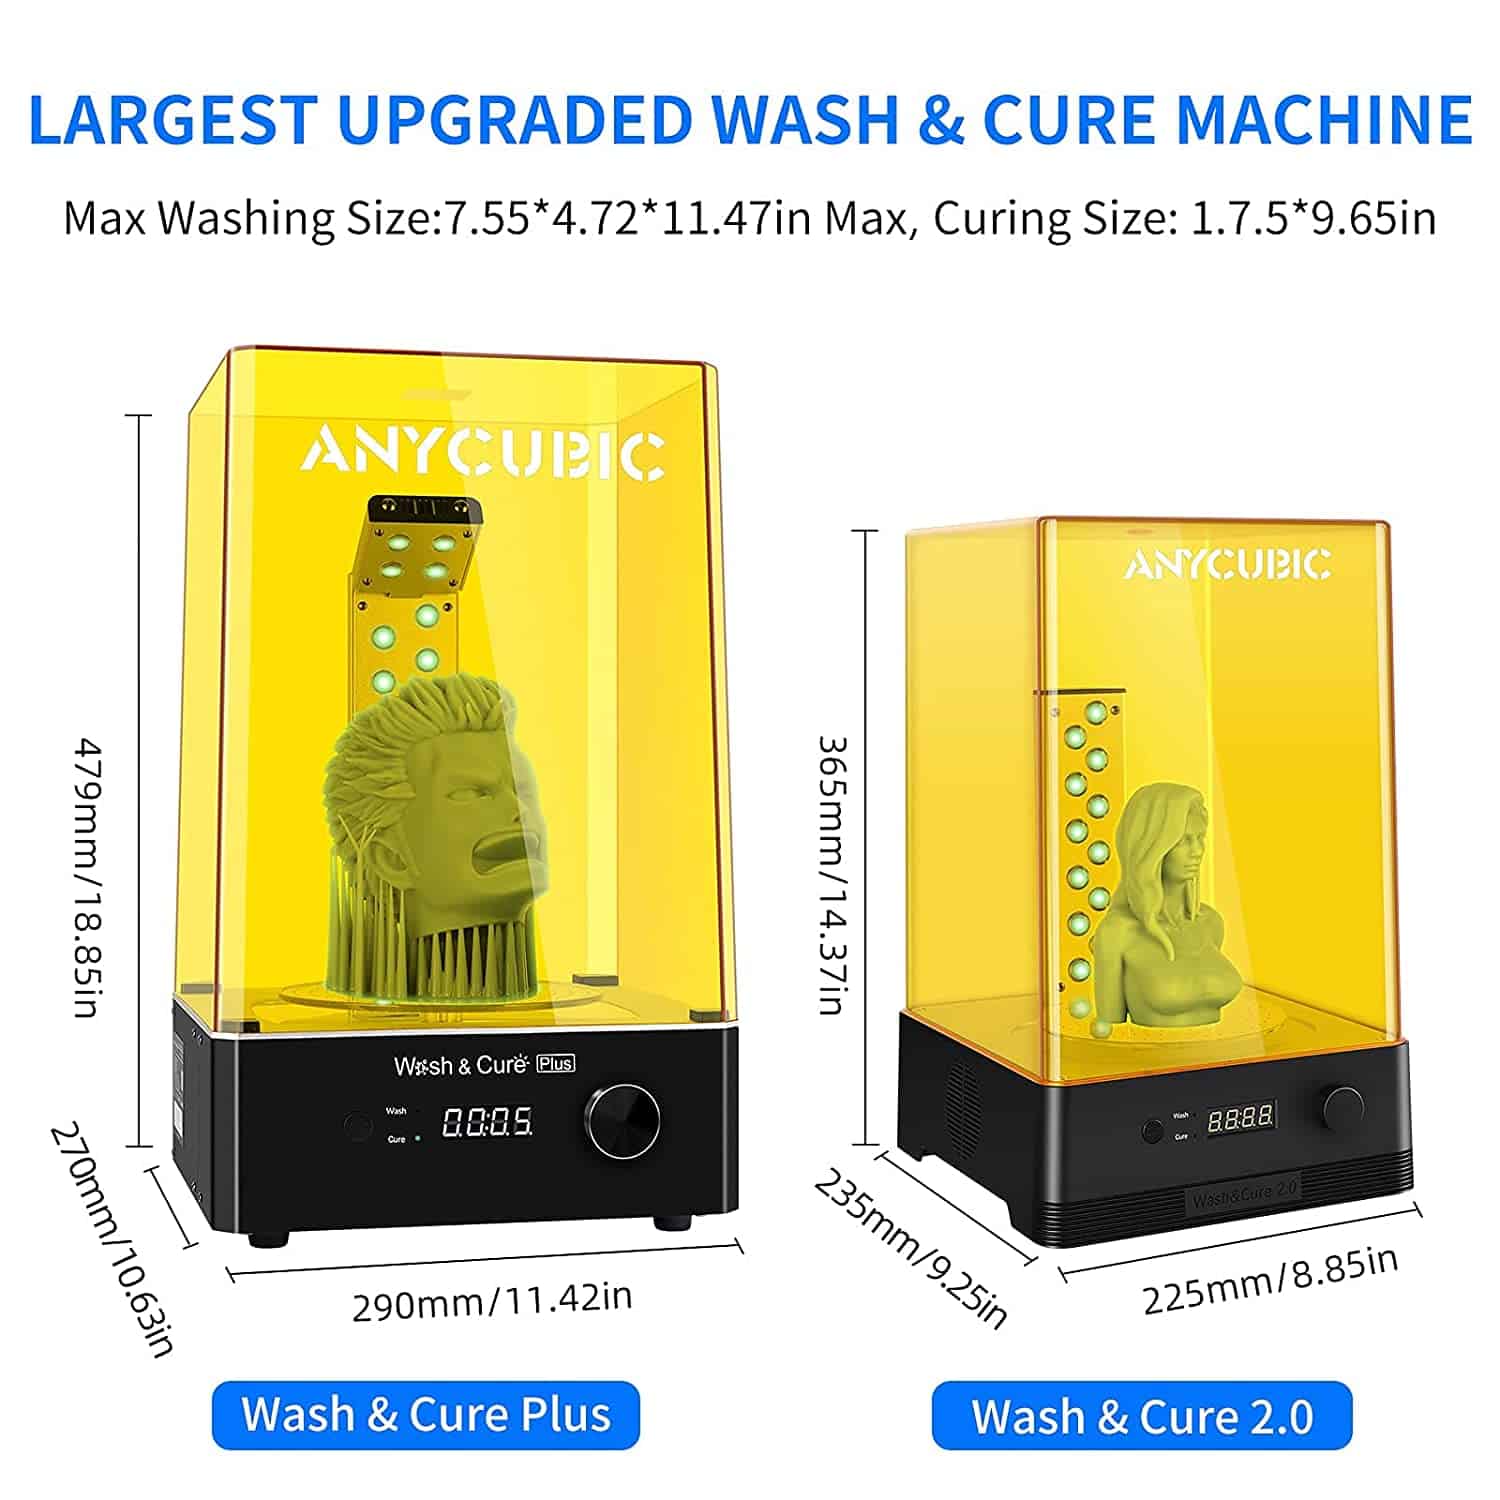 ANYCUBIC Wash and Cure Plus, Largest 2 in 1 Wash Cure Machine